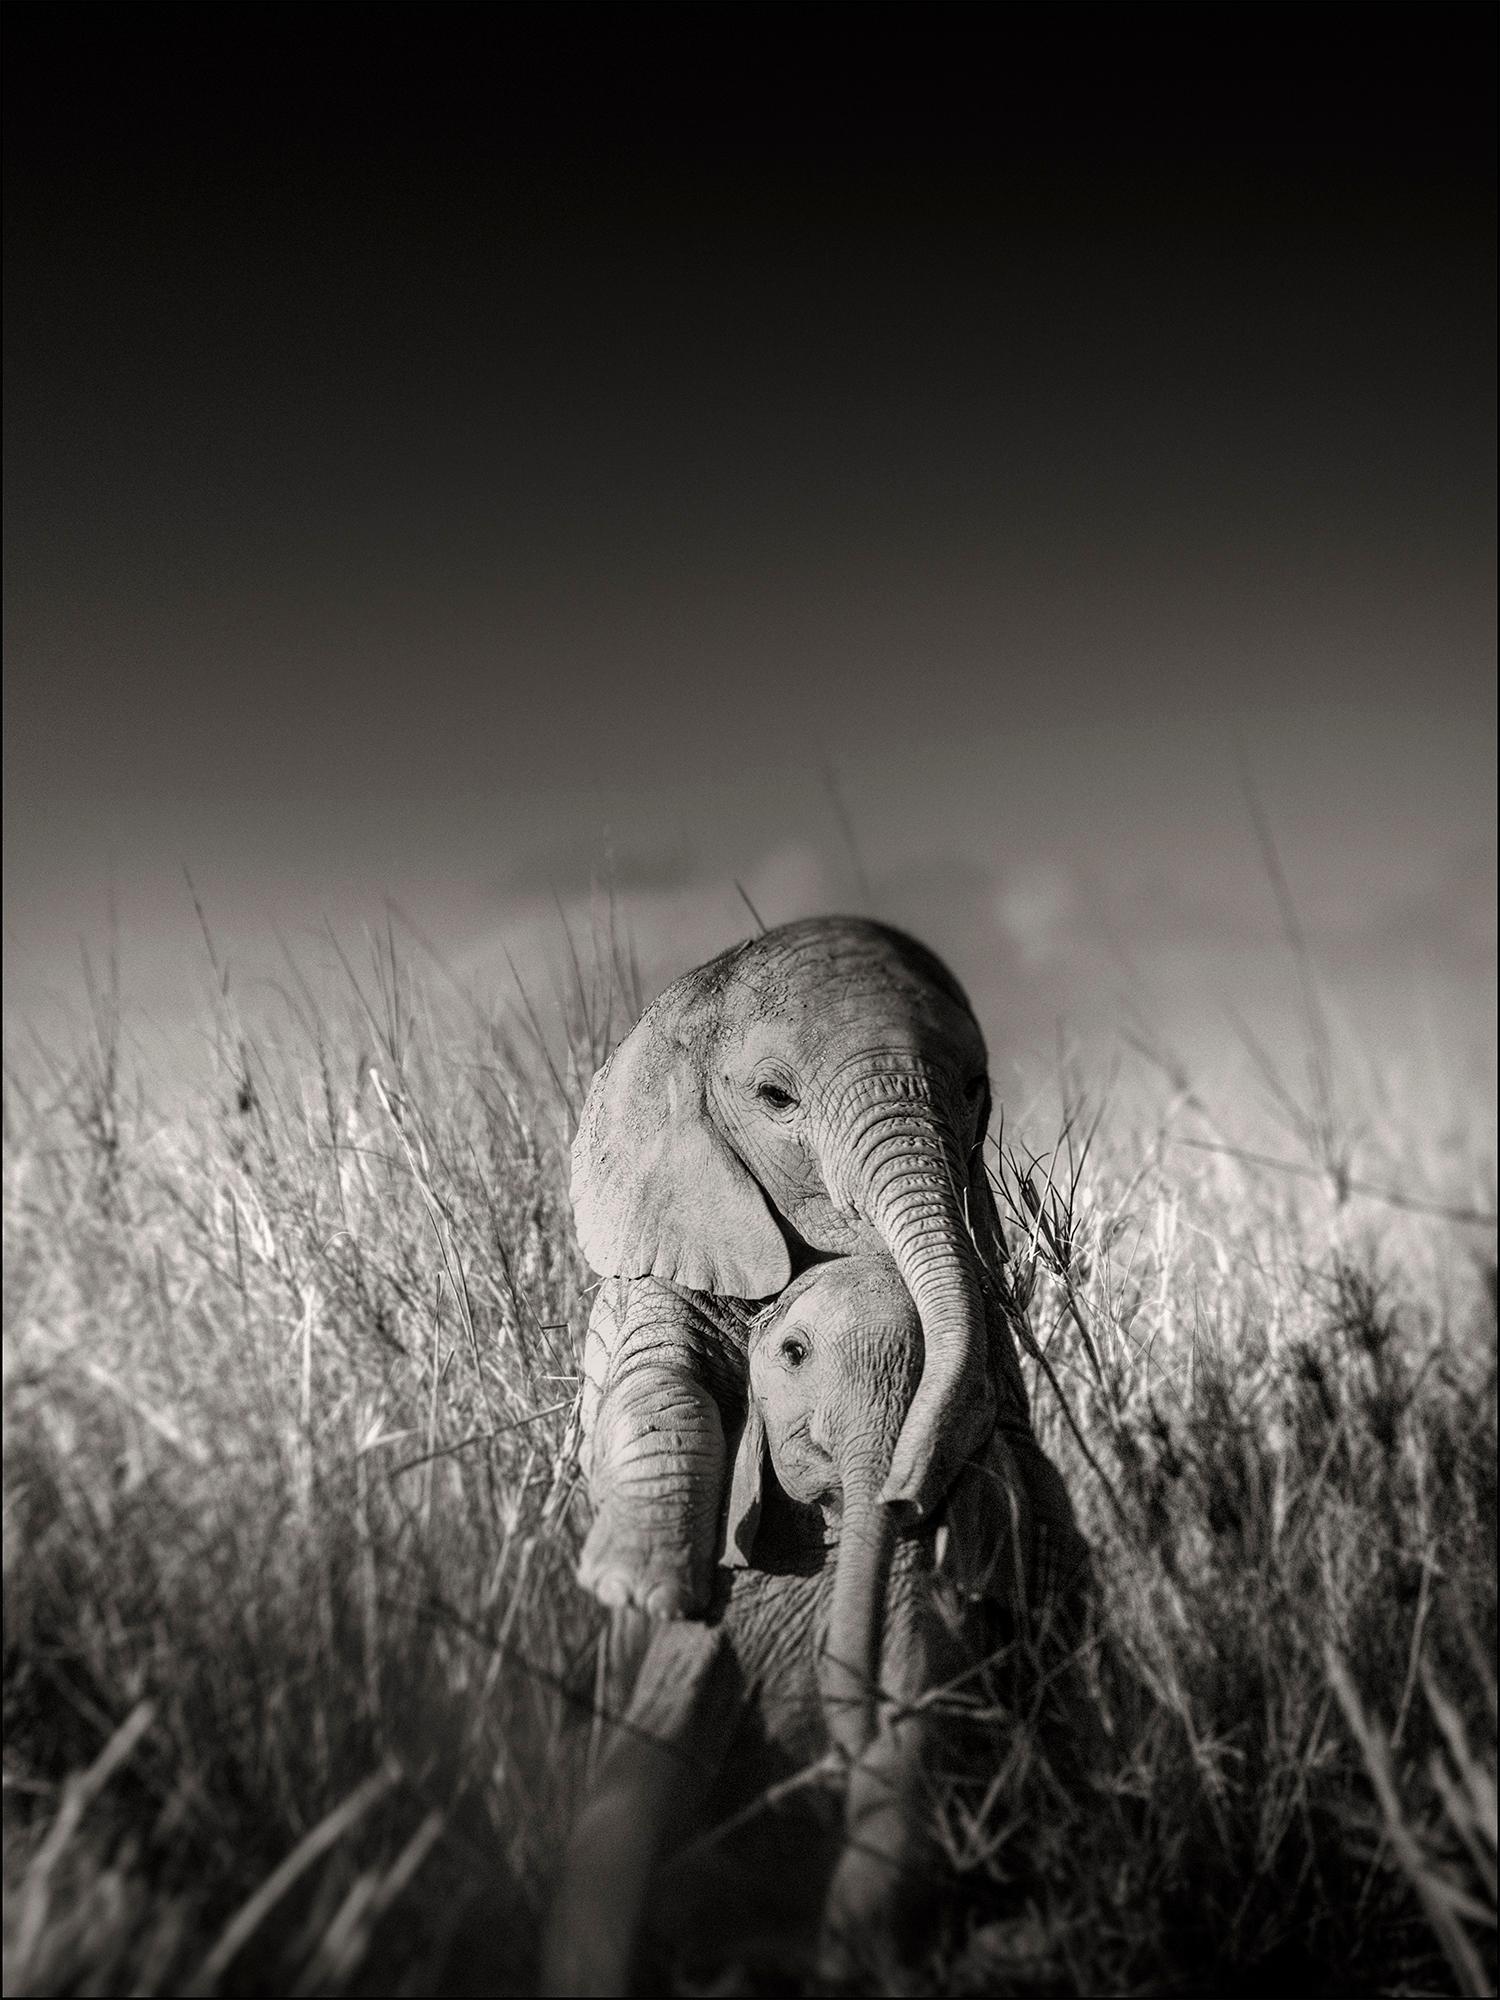 Joachim Schmeisser Black and White Photograph - Wild elephant babies playing I, contemporary, wildlife, b+w photography